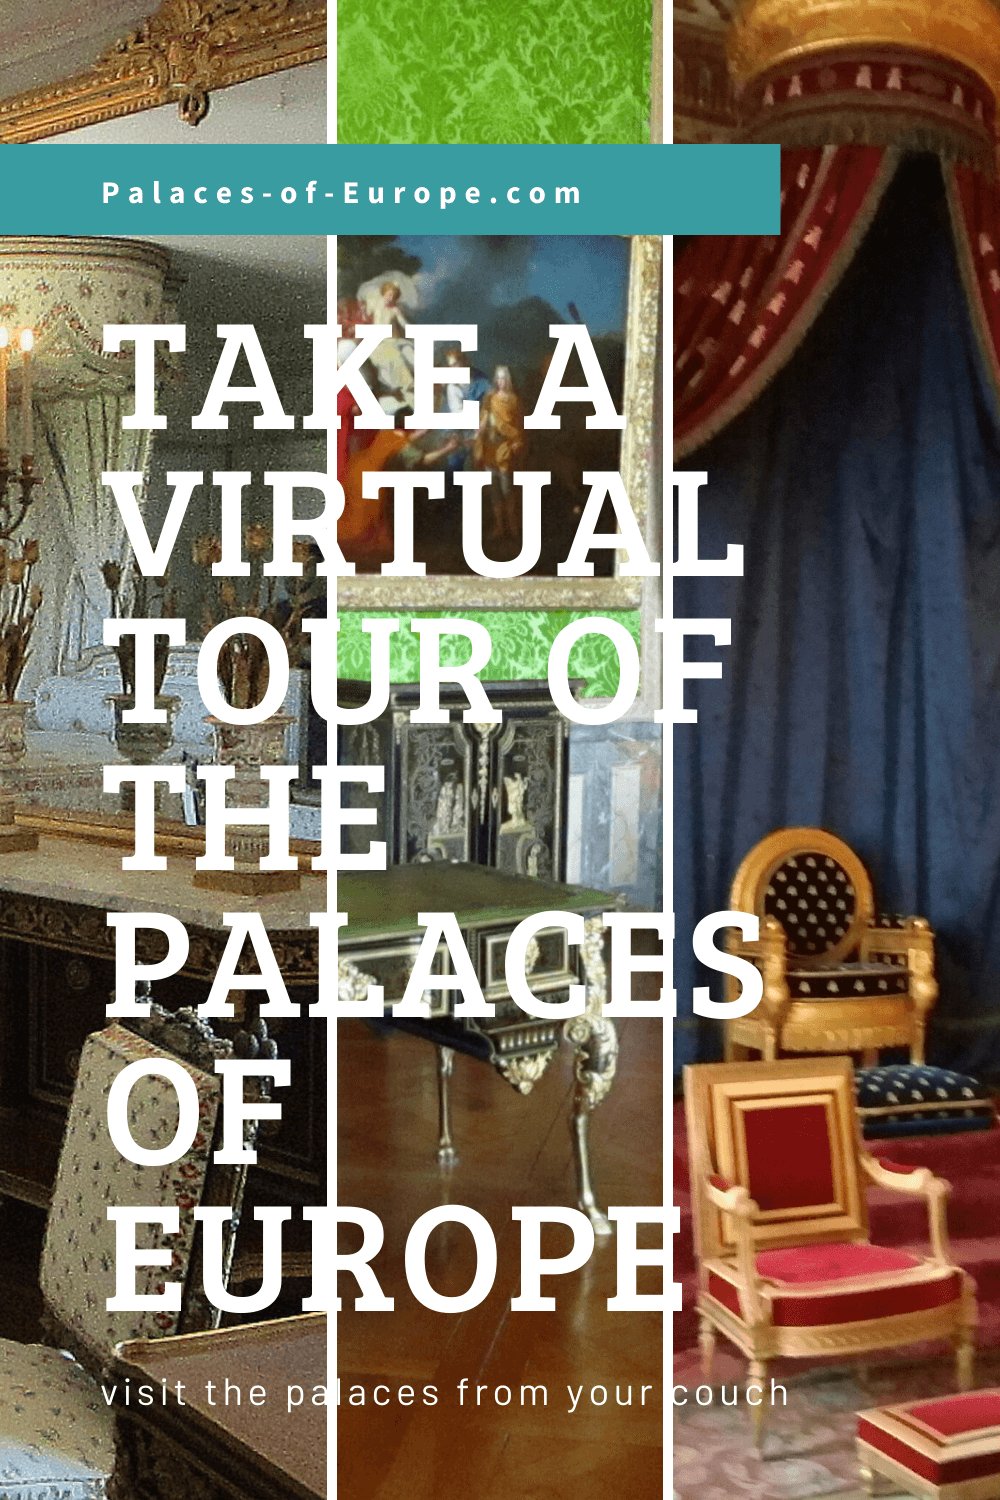 Visit these palaces of Europe with a virtual tour, comfy from your couch!